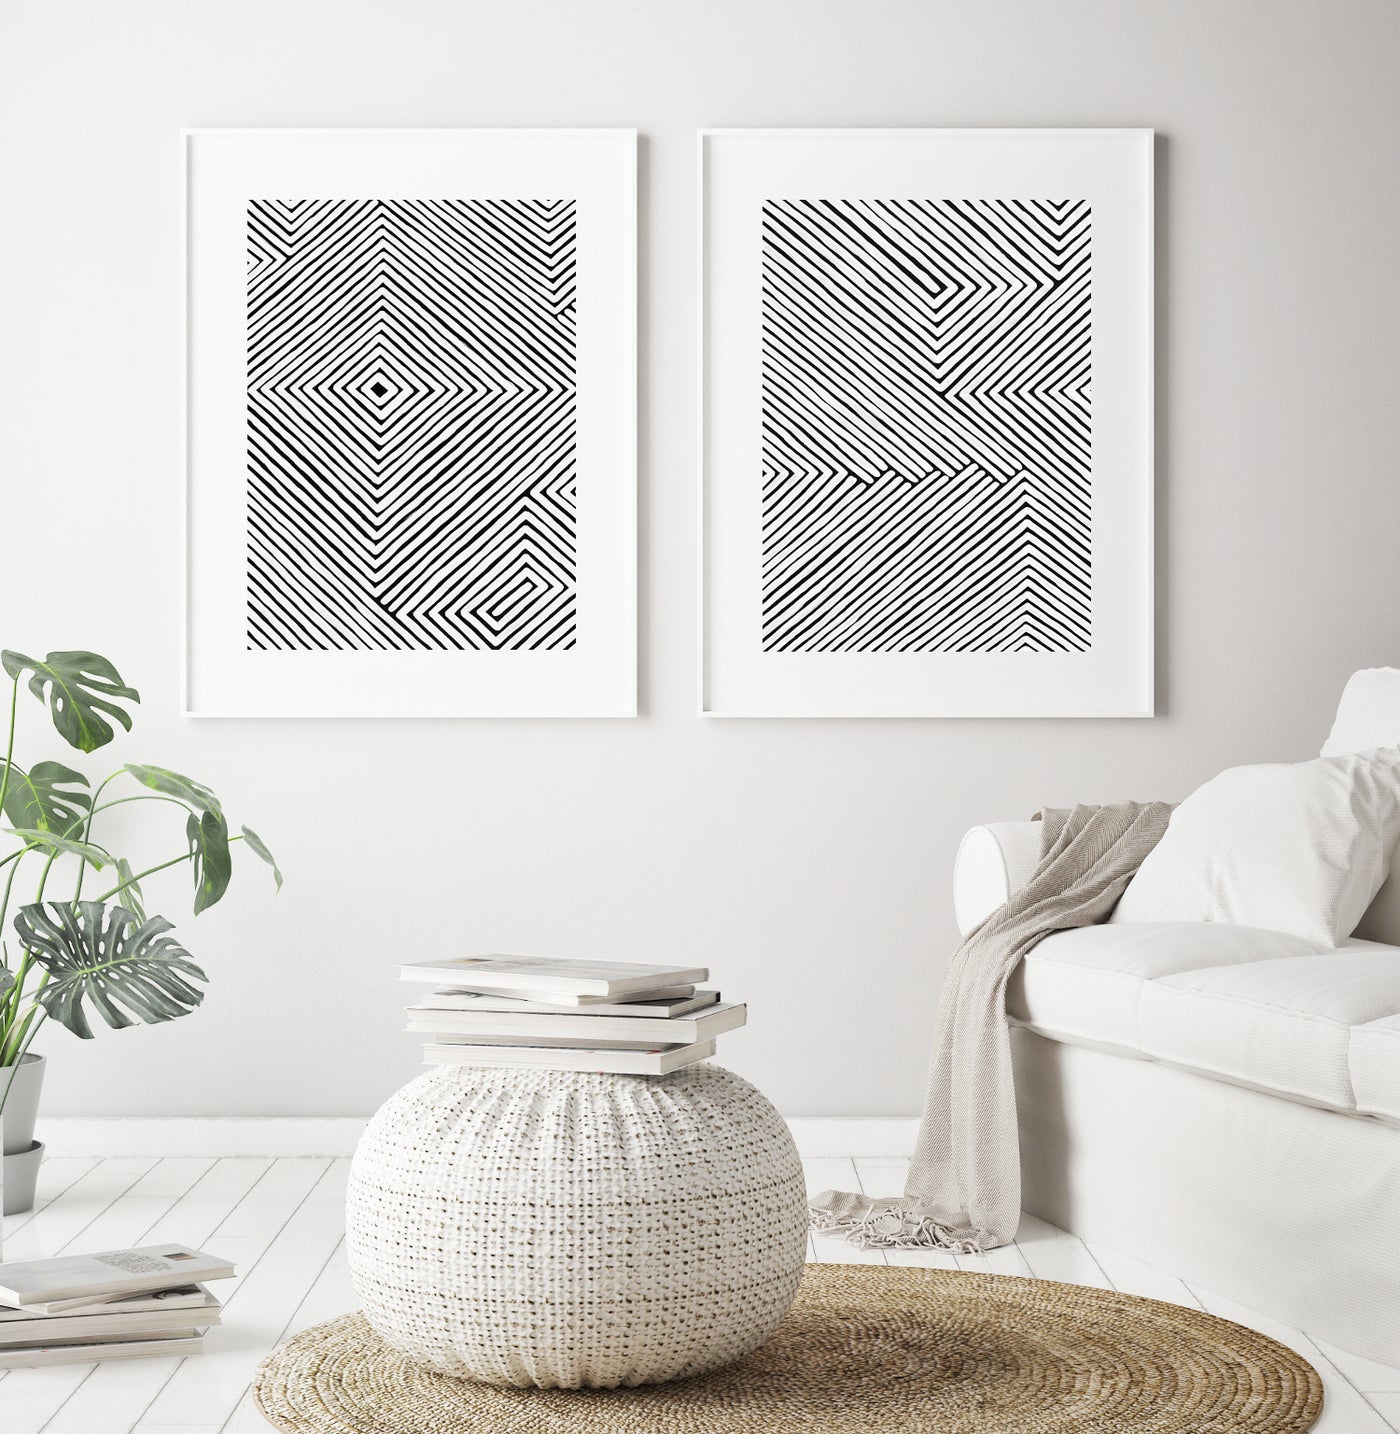 Black & White Abstract Wall Art, Contemporary Geometric Art Print Set, Ready-to-Hang Canvas, Extra Large Wall Decor | arrtopia